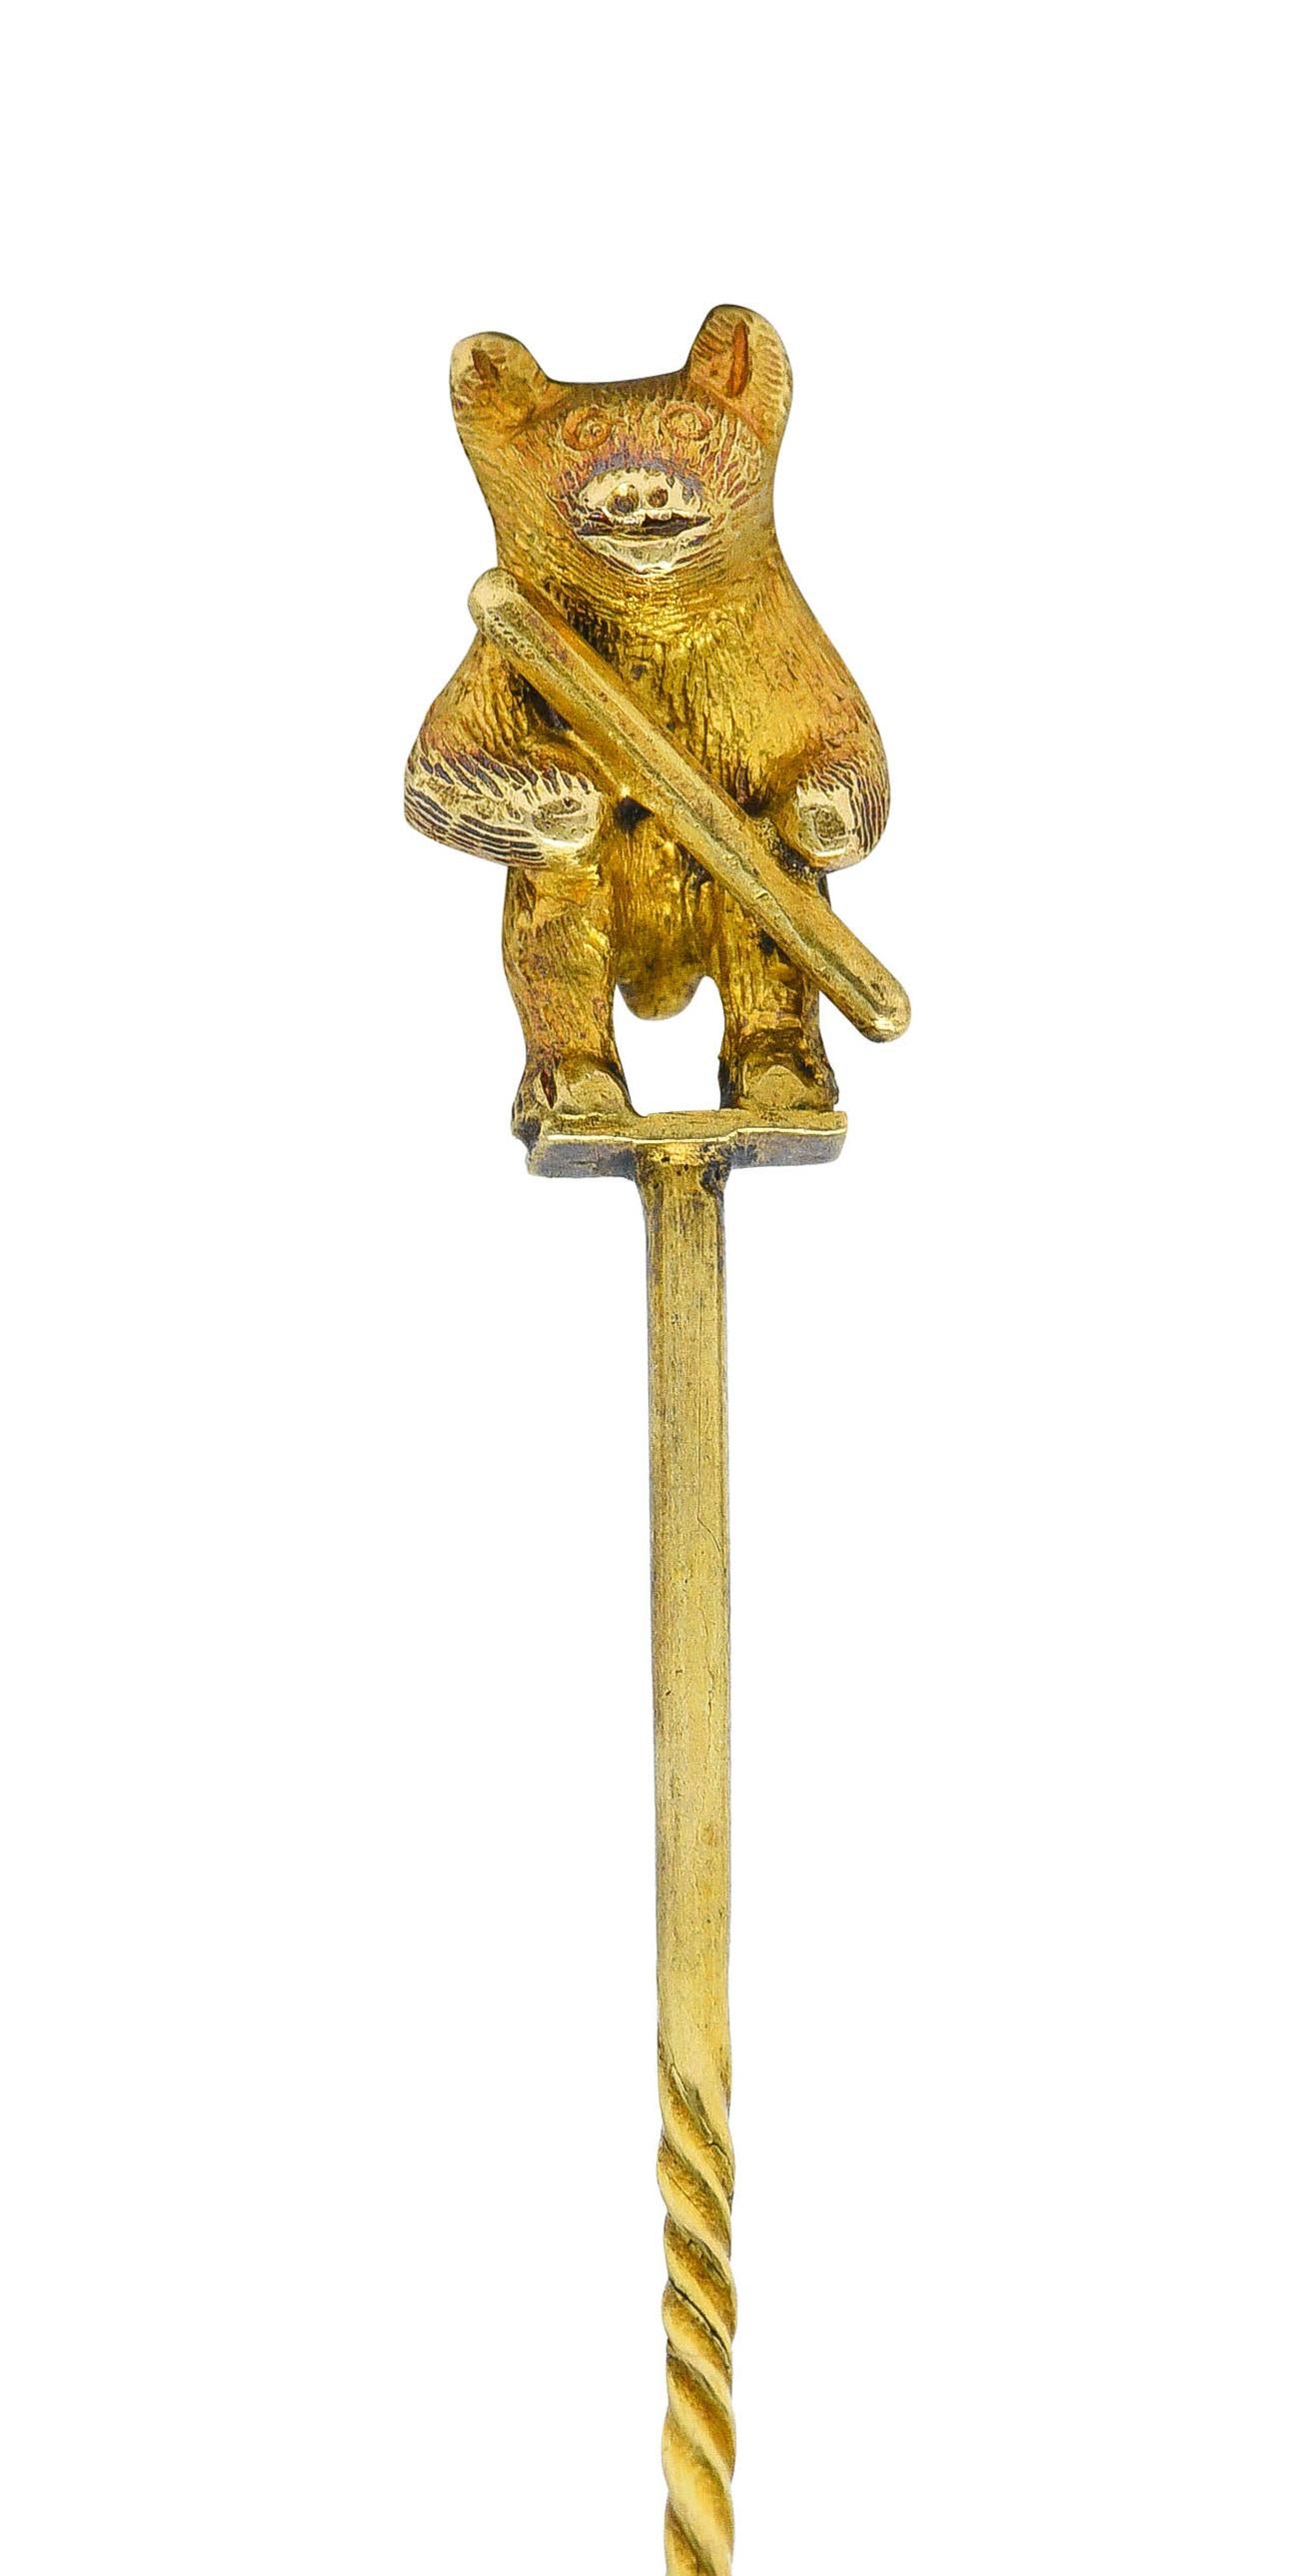 Depicting a stylized bear standing on its hind legs while grasping a branch

With highly textured fur

Bear tested as 18 karat gold while pin stem is 14 karat gold

Circa: 1905

Bear measures: 5/16 x 9/16 inch

Total length: 2 1/2 inches

Total